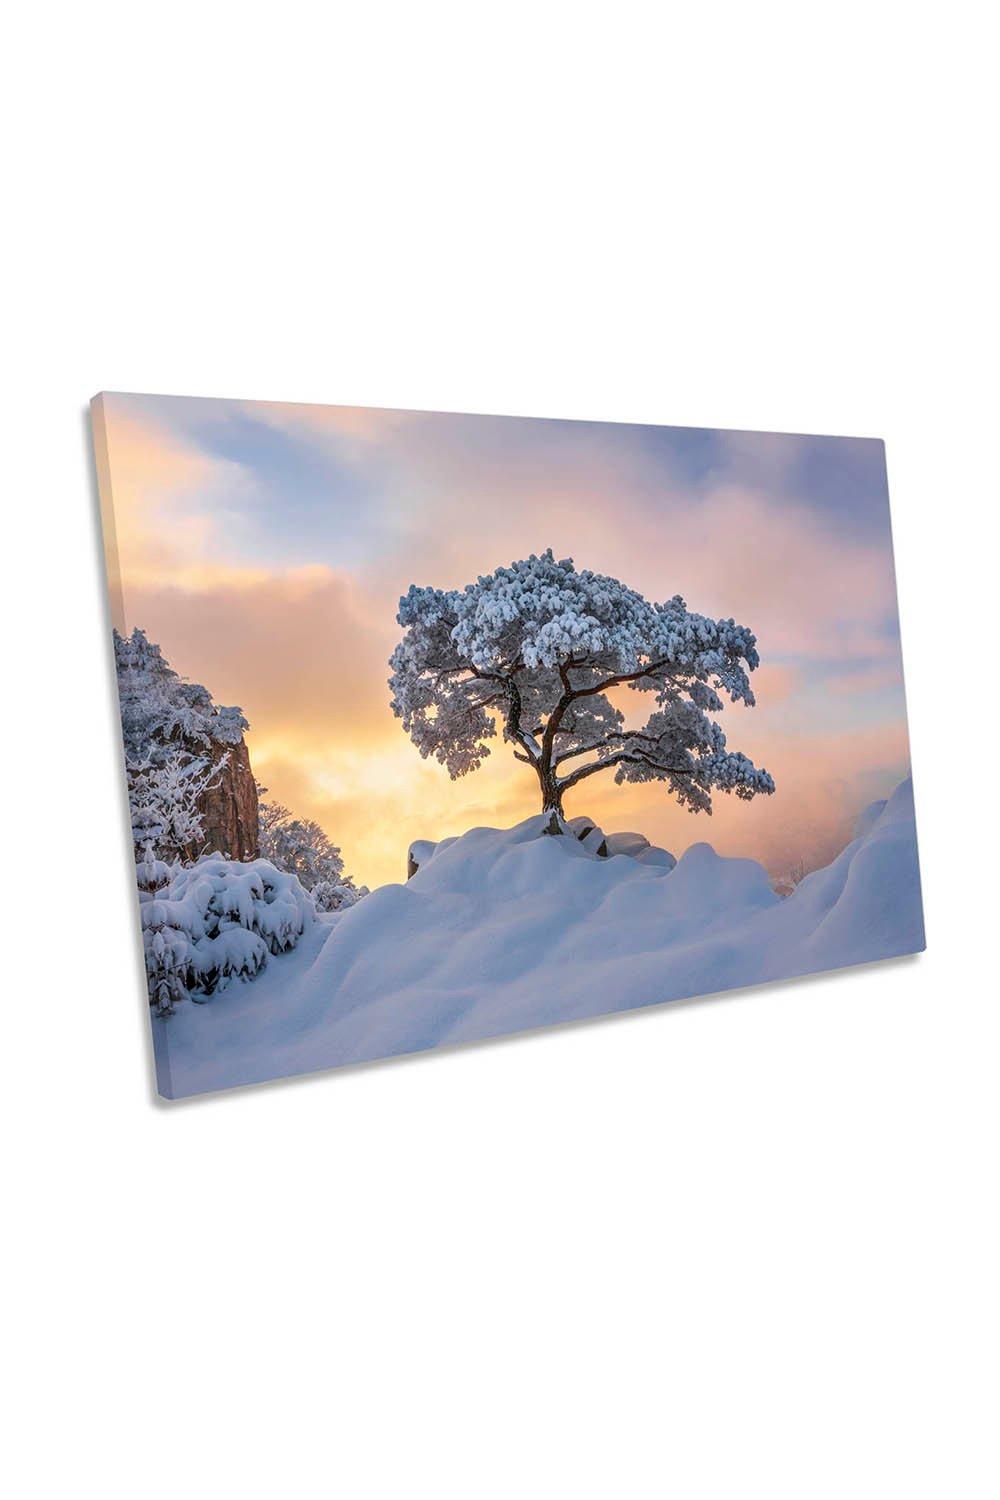 Cold Lonely Tree Snow Winder Landscape Canvas Wall Art Picture Print